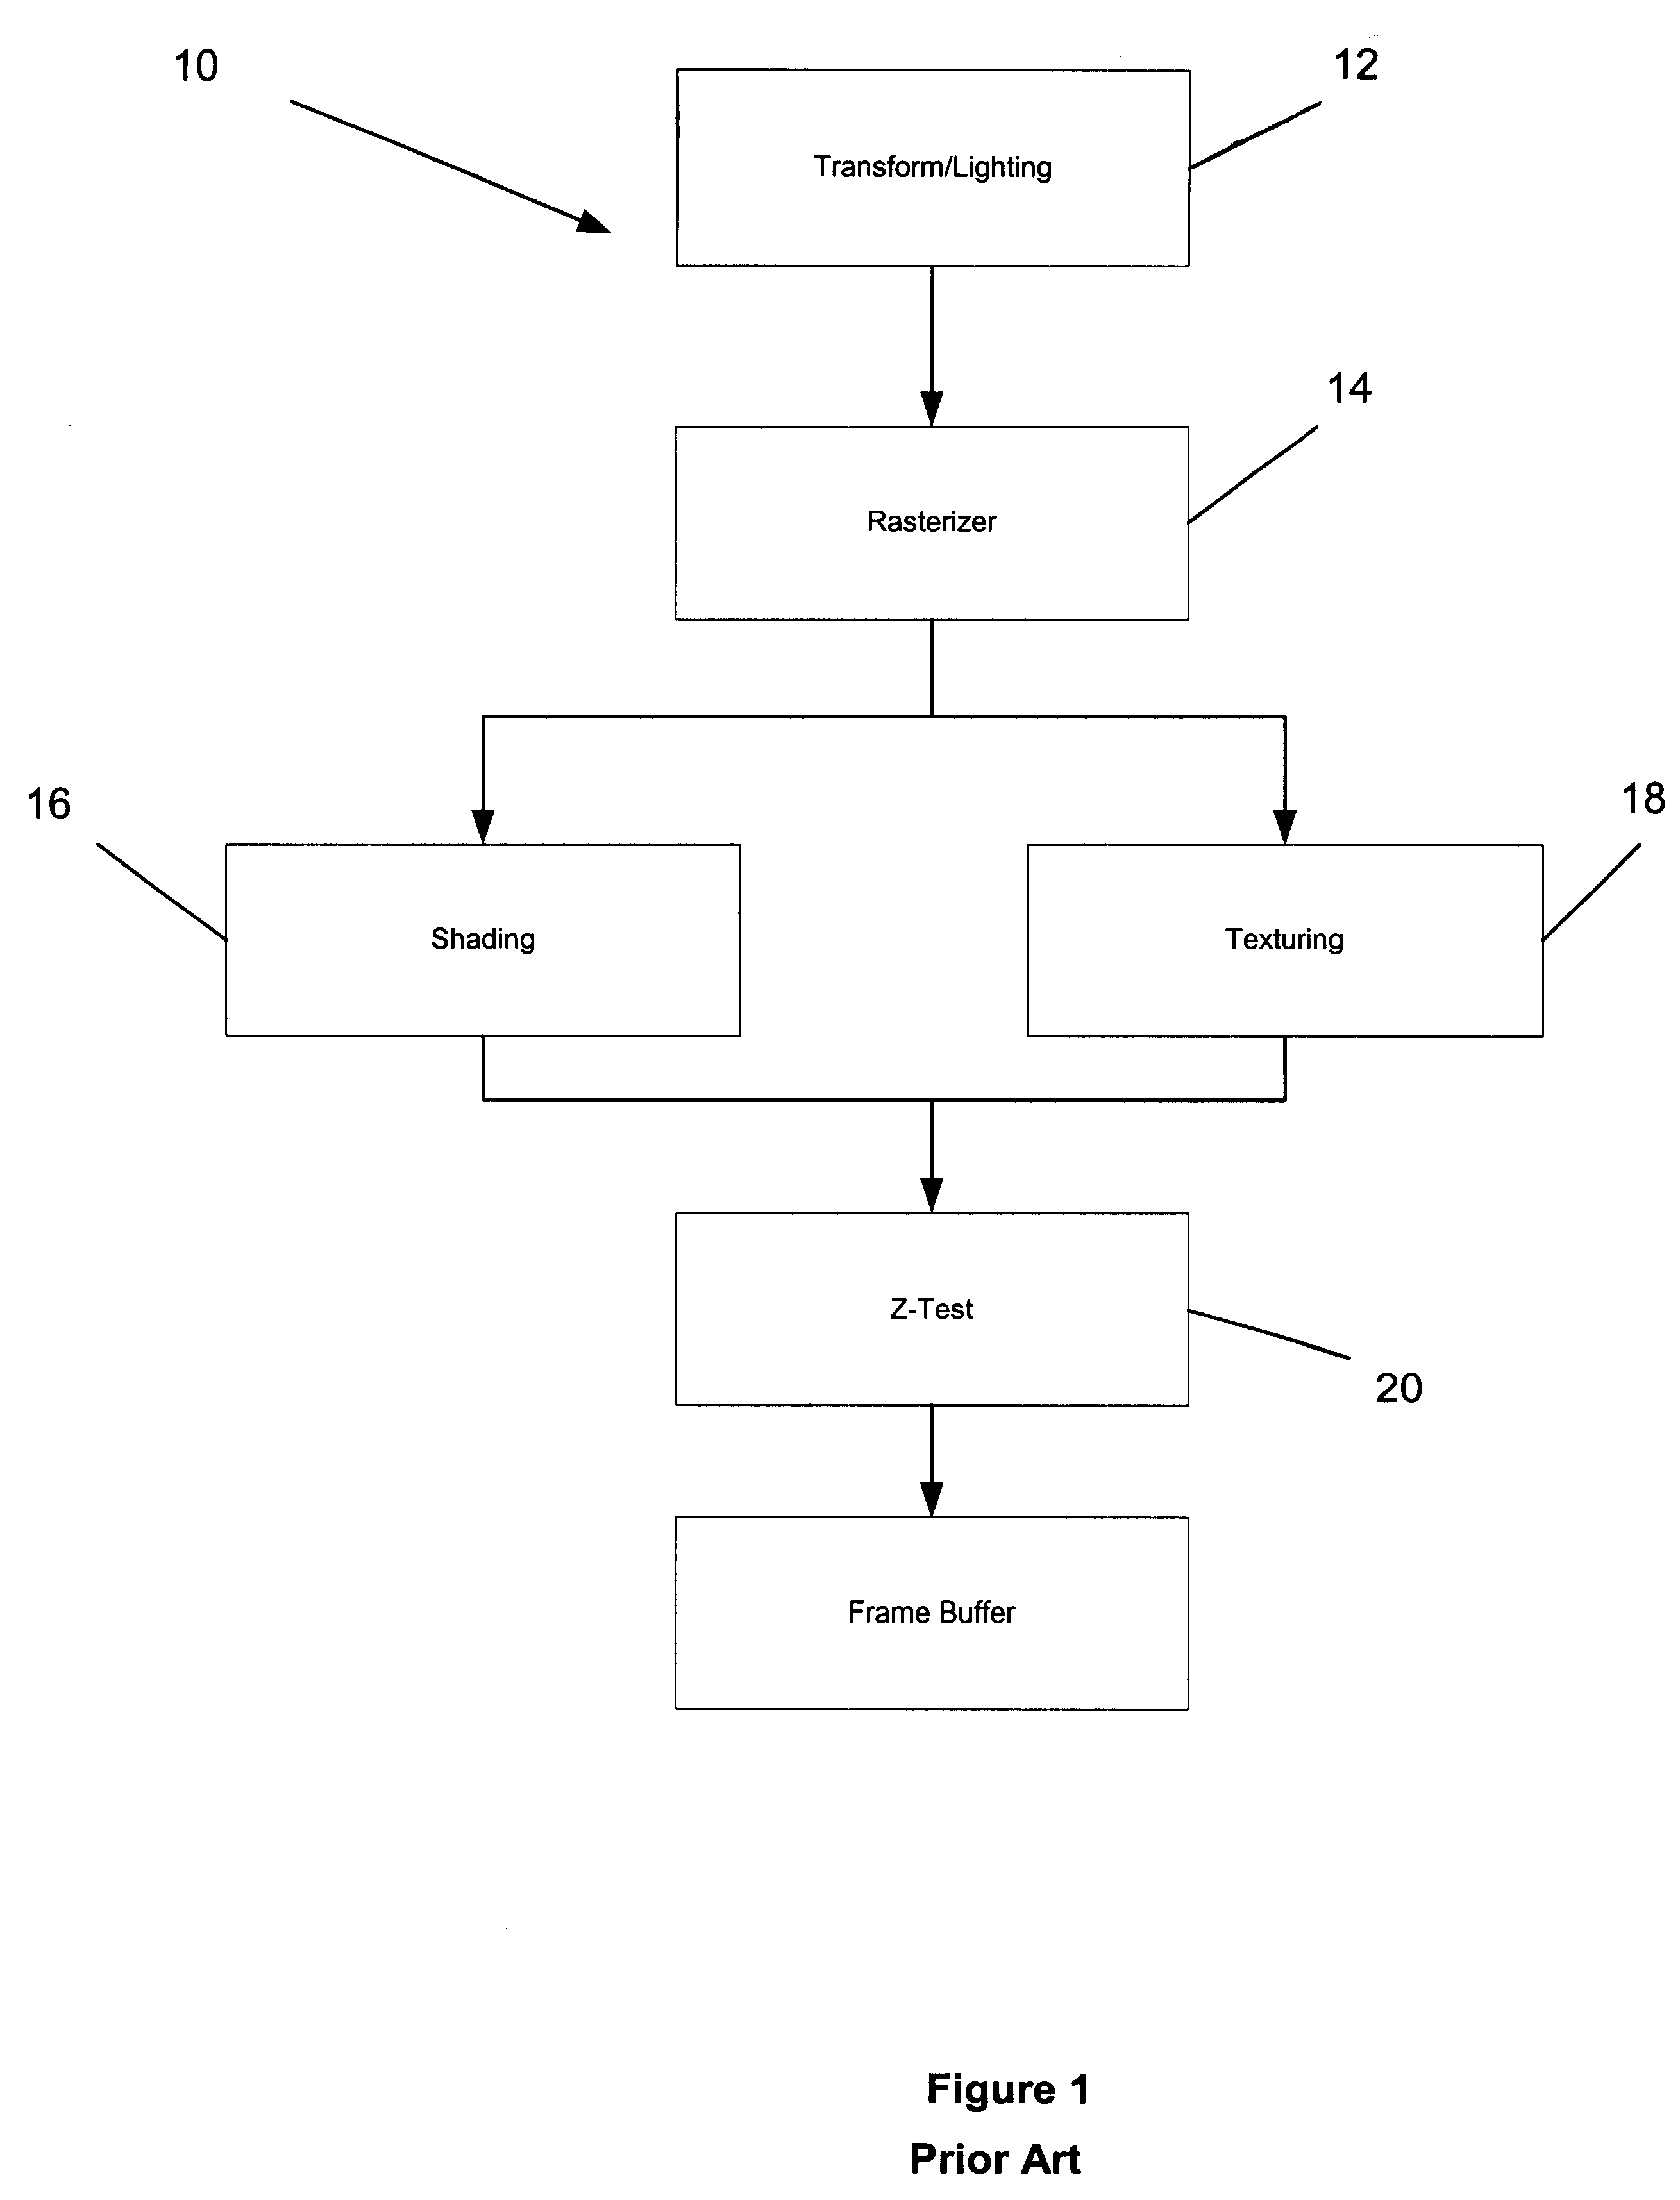 System, method and article of manufacture for Z-value and stencil culling prior to rendering in a computer graphics processing pipeline